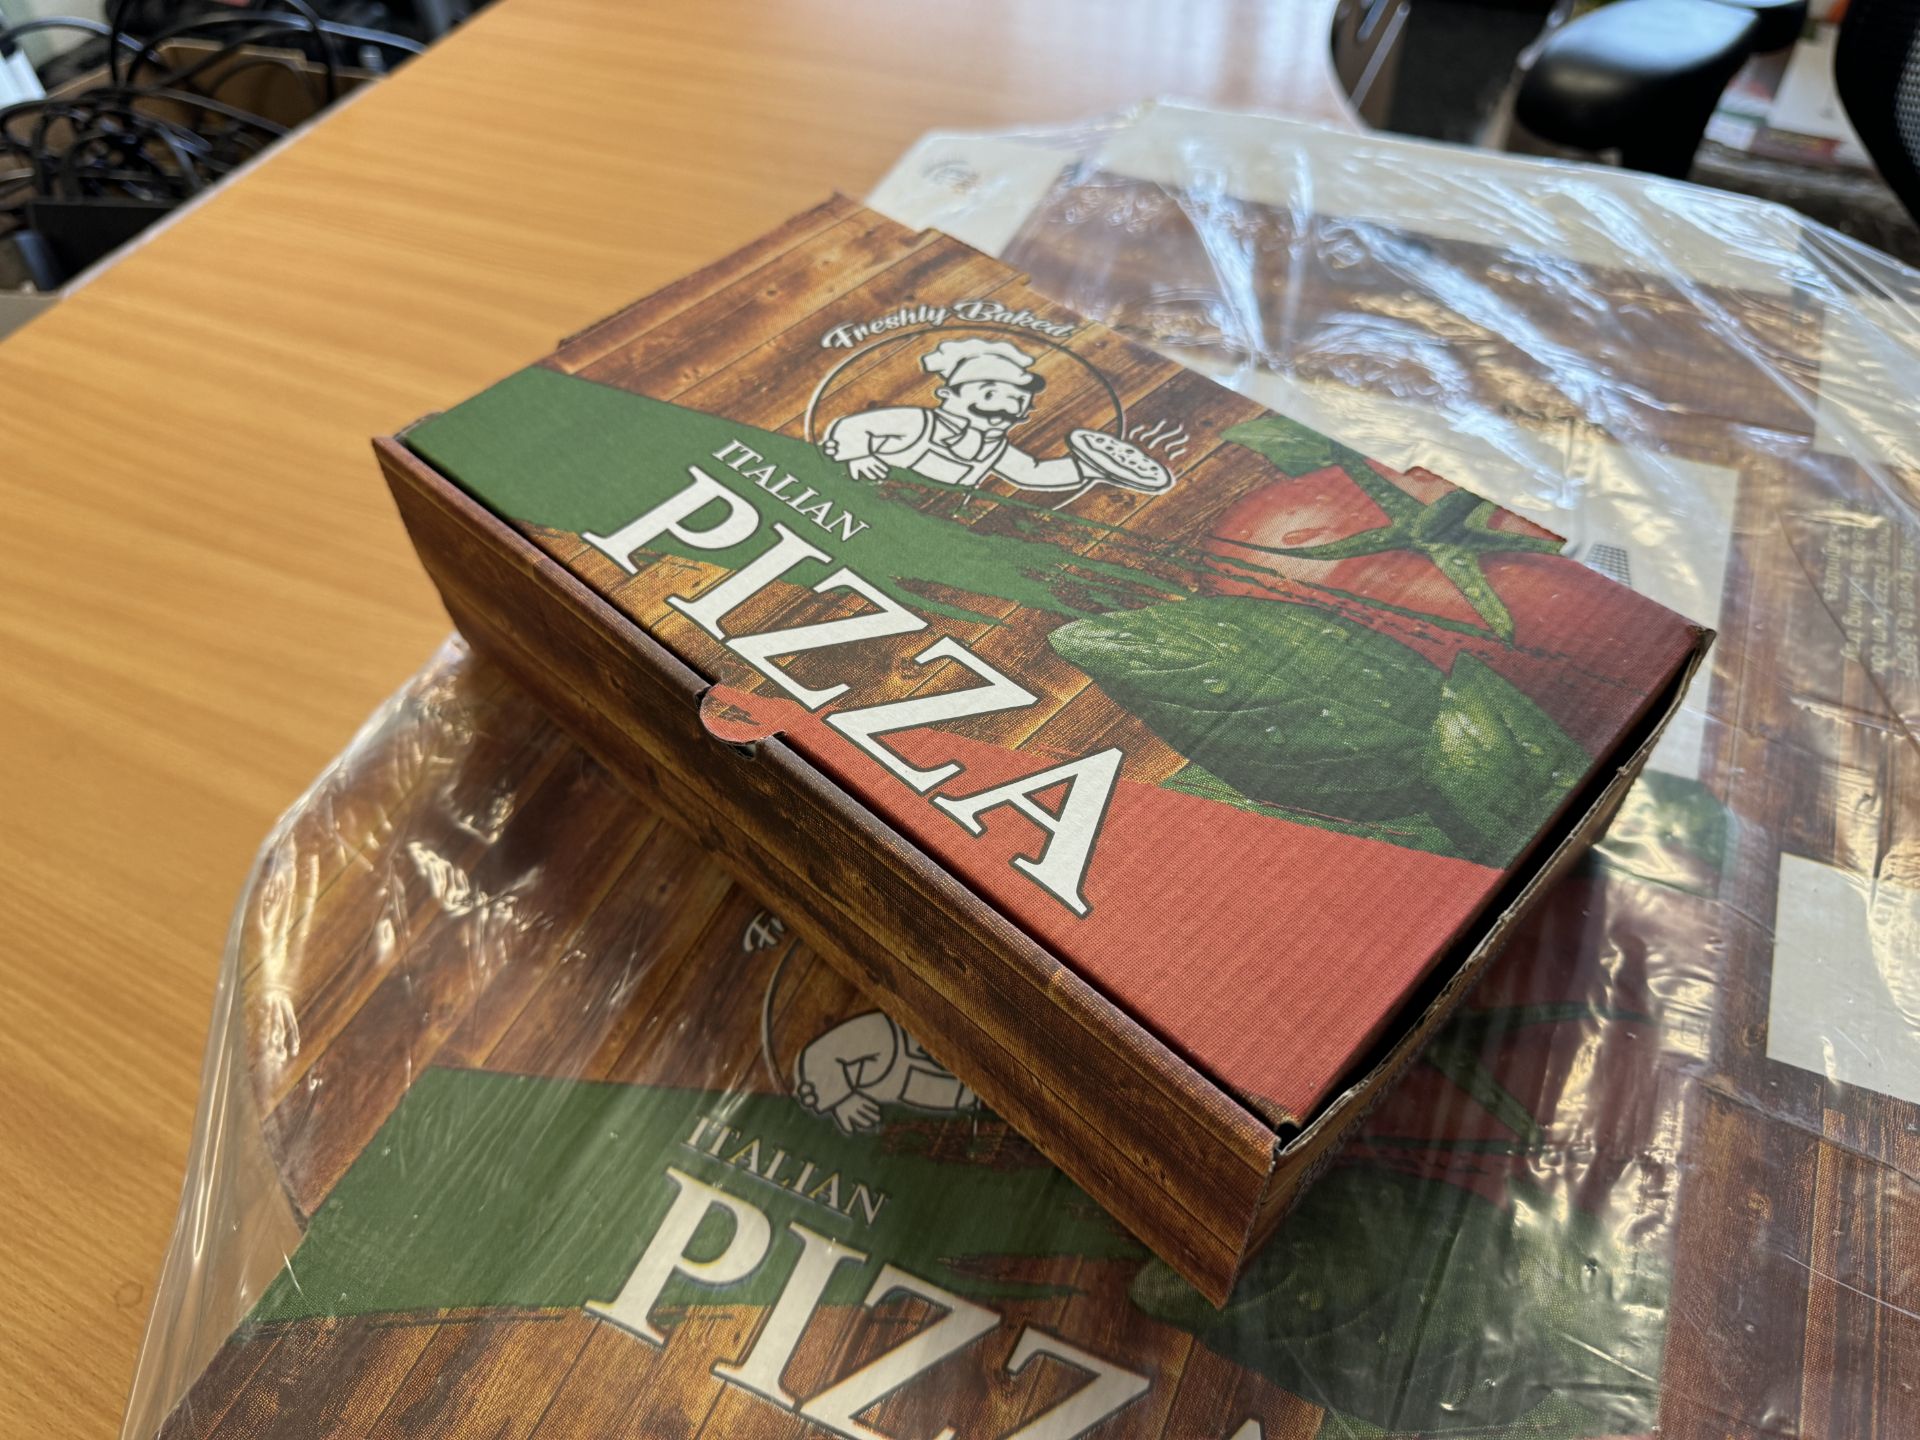 Circa 720 - Italian Pizza Calzone Boxes (Cardboard) - Multiple Uses RRP £130 - Image 3 of 12